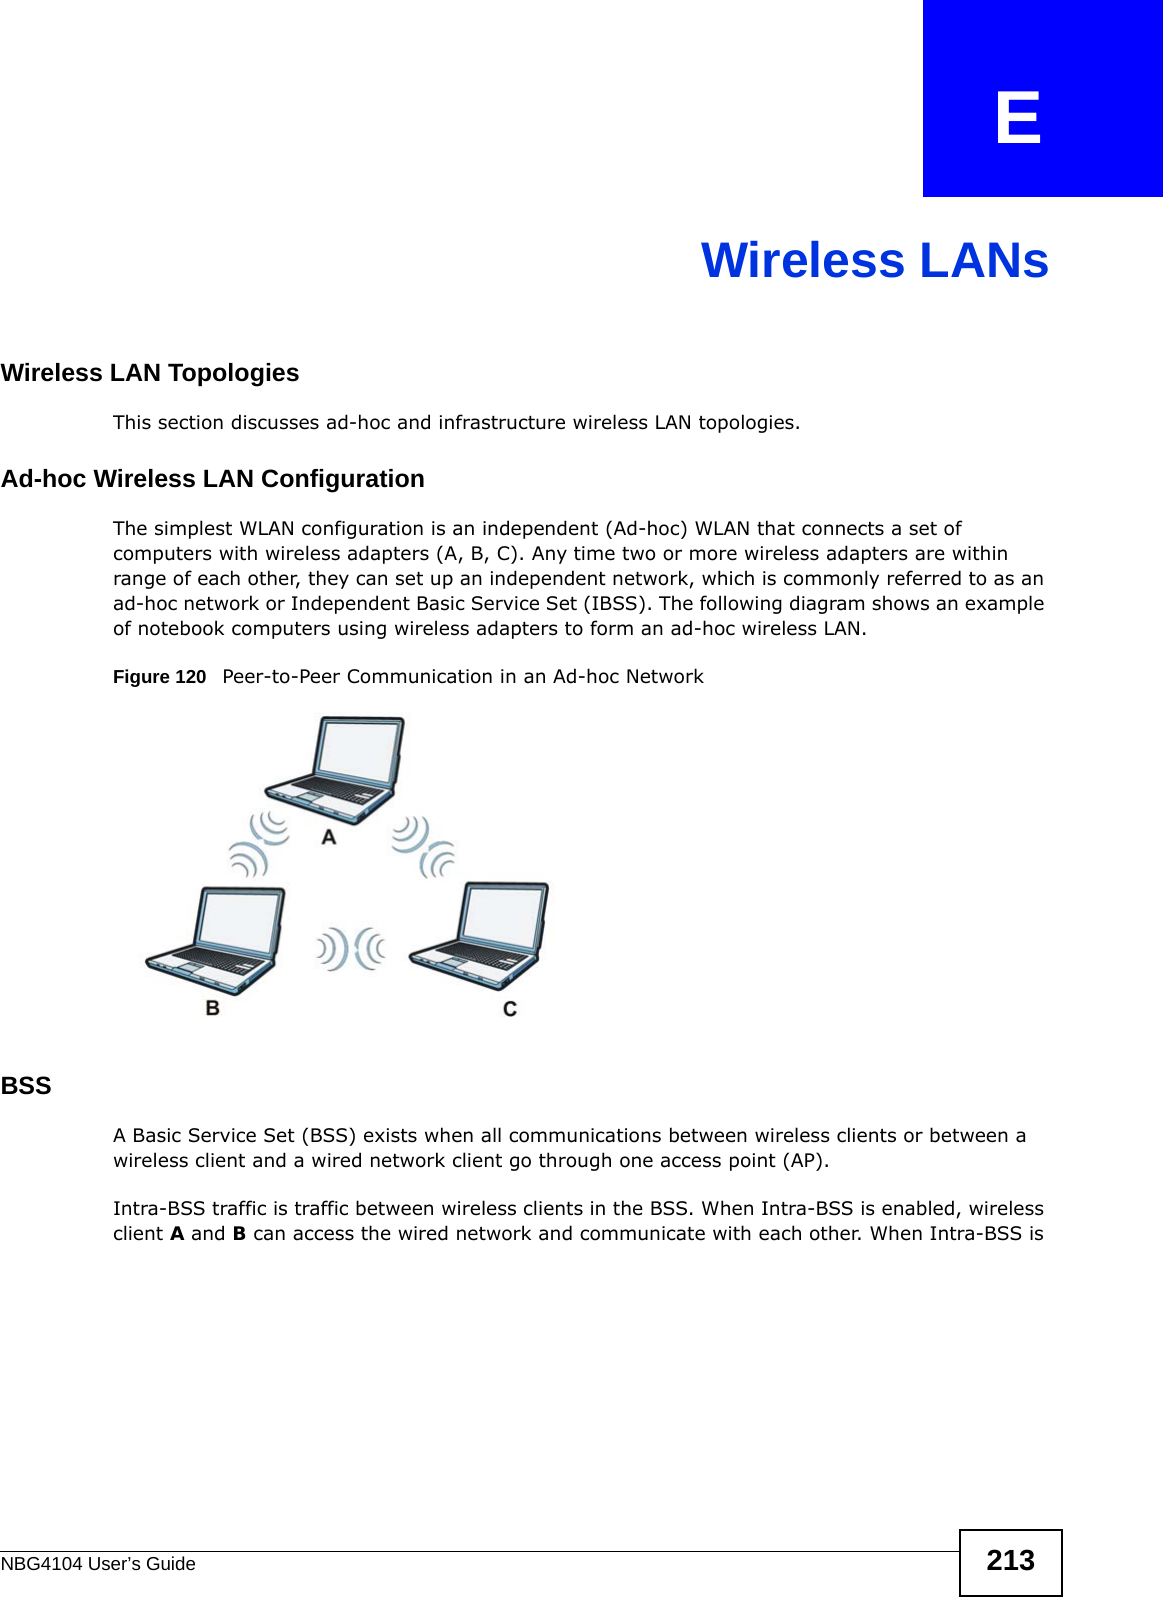 NBG4104 User’s Guide 213APPENDIX   EWireless LANsWireless LAN TopologiesThis section discusses ad-hoc and infrastructure wireless LAN topologies.Ad-hoc Wireless LAN ConfigurationThe simplest WLAN configuration is an independent (Ad-hoc) WLAN that connects a set of computers with wireless adapters (A, B, C). Any time two or more wireless adapters are within range of each other, they can set up an independent network, which is commonly referred to as an ad-hoc network or Independent Basic Service Set (IBSS). The following diagram shows an example of notebook computers using wireless adapters to form an ad-hoc wireless LAN. Figure 120   Peer-to-Peer Communication in an Ad-hoc NetworkBSSA Basic Service Set (BSS) exists when all communications between wireless clients or between a wireless client and a wired network client go through one access point (AP). Intra-BSS traffic is traffic between wireless clients in the BSS. When Intra-BSS is enabled, wireless client A and B can access the wired network and communicate with each other. When Intra-BSS is 